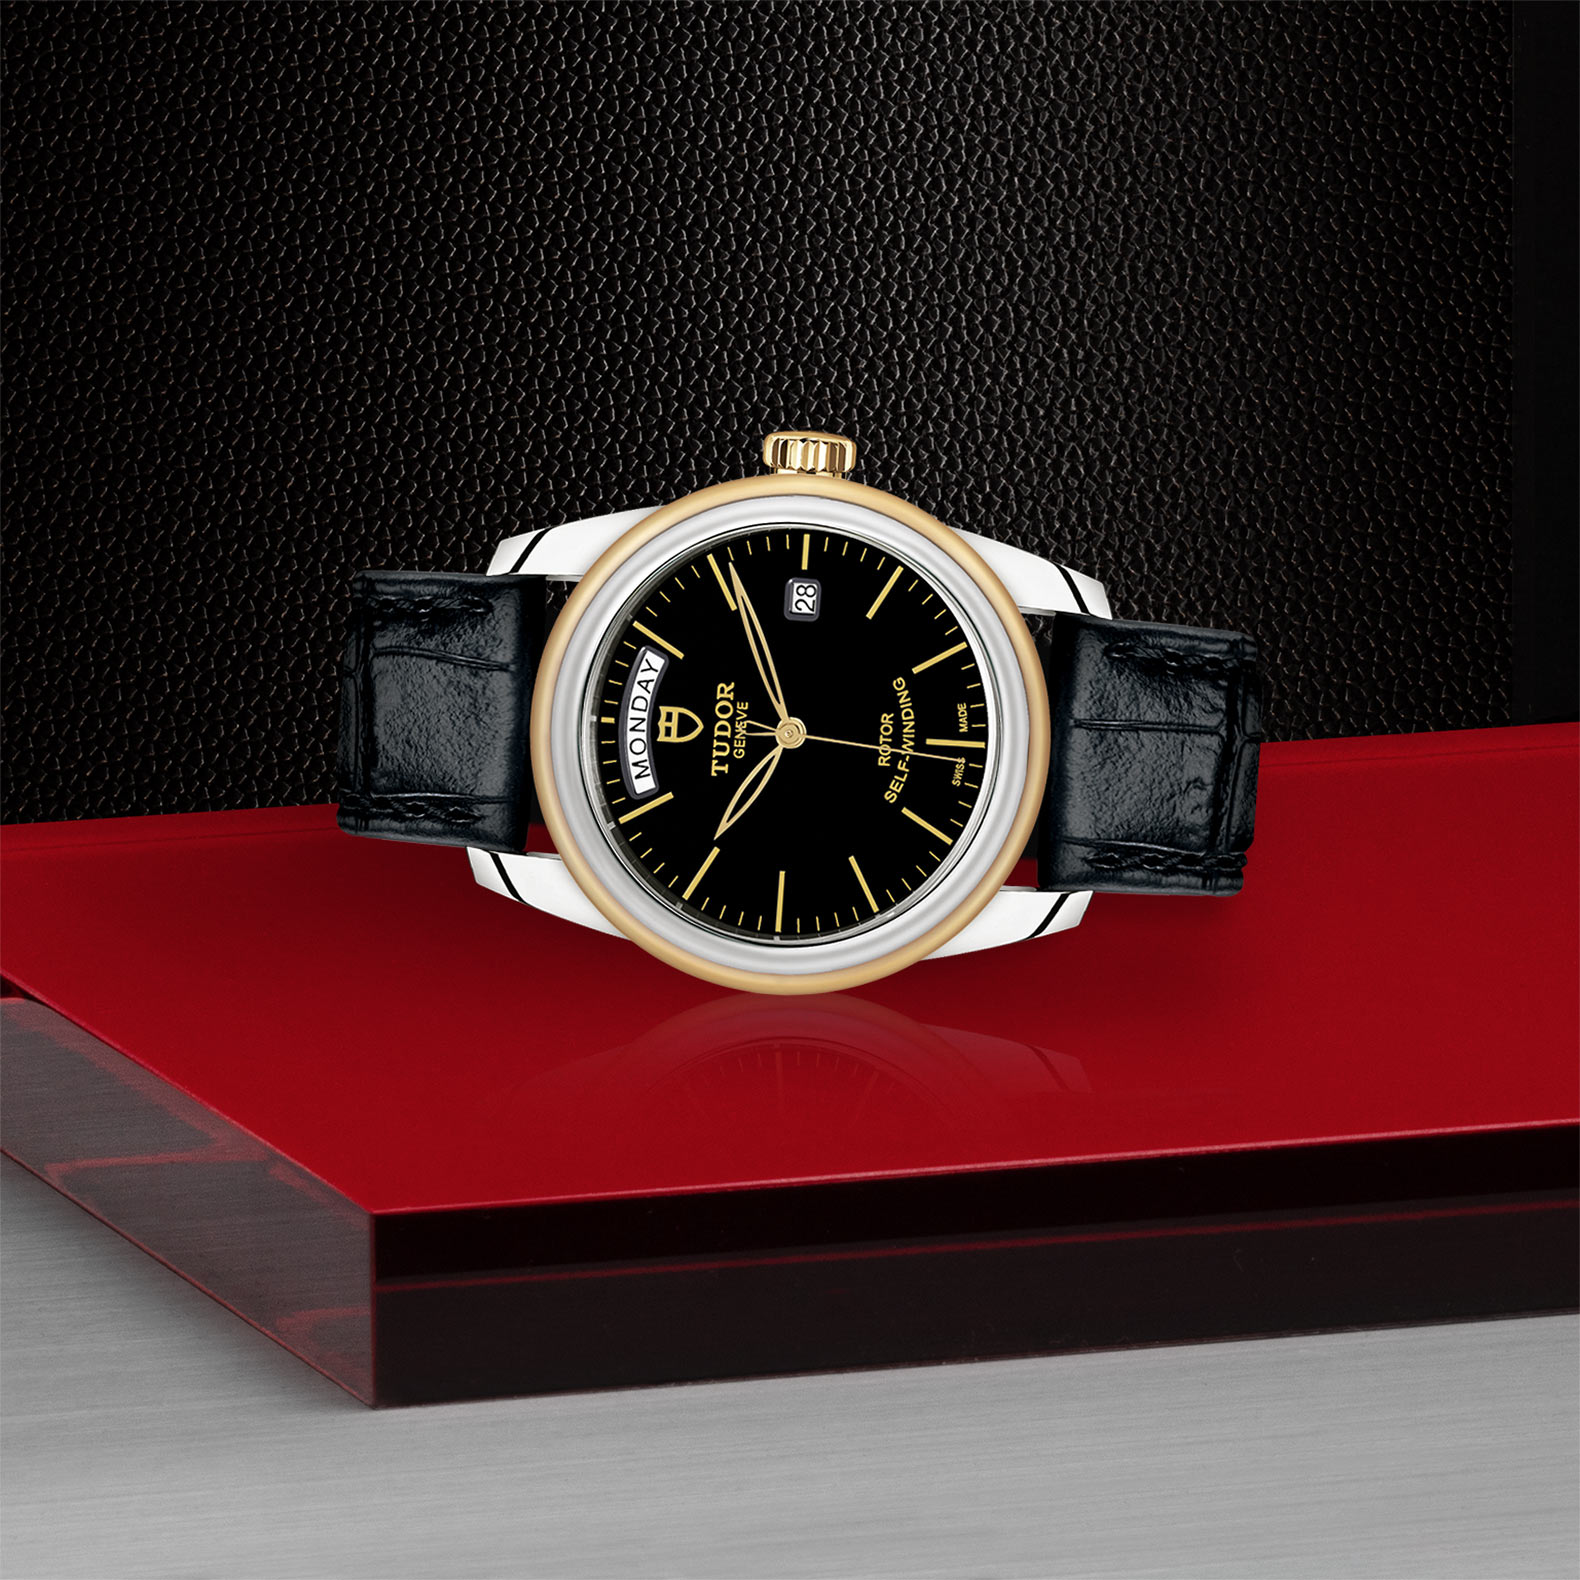 Tudor Glamour Date+Day M56003-0040